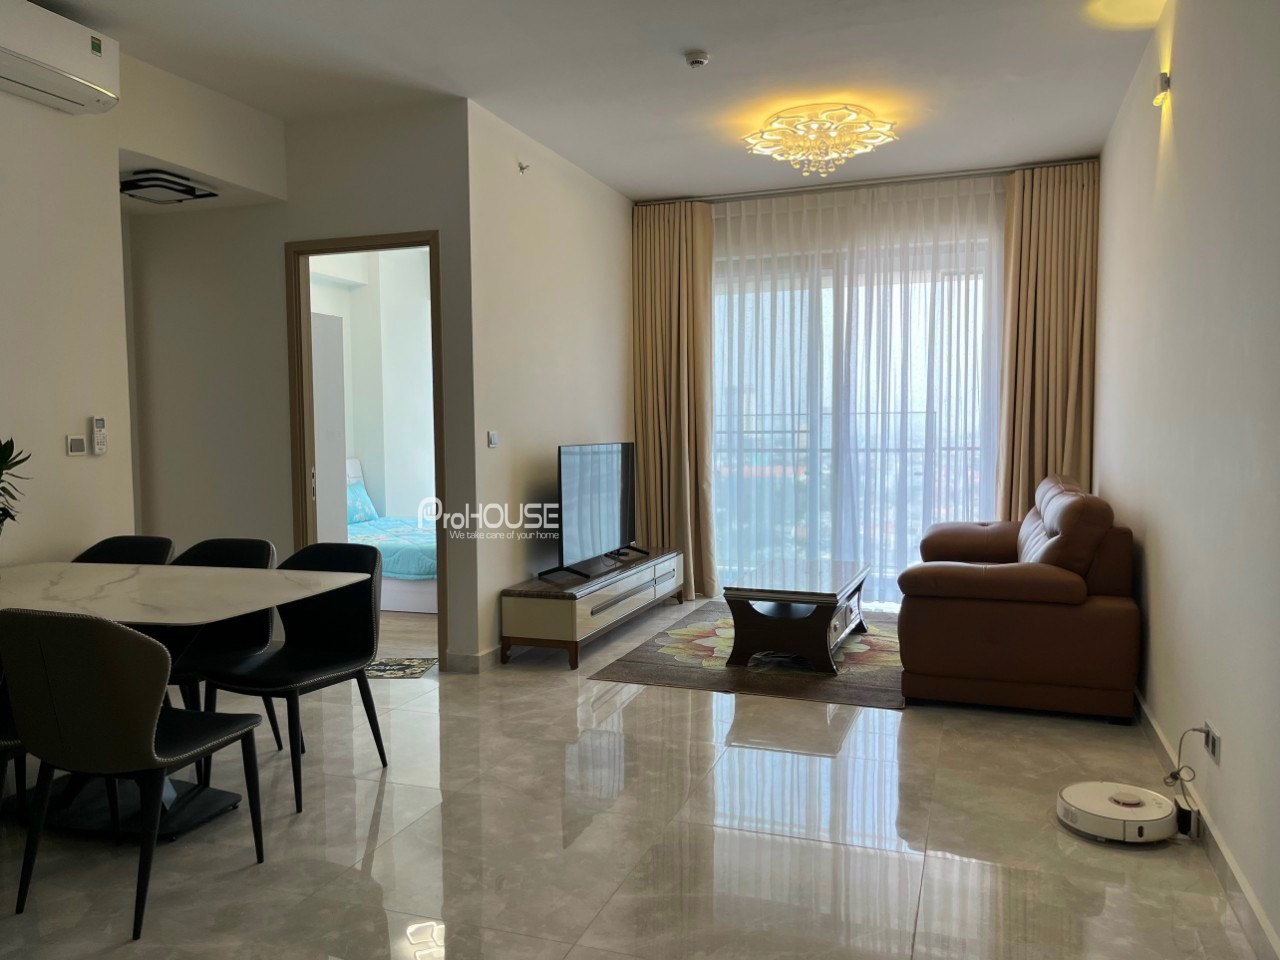 Modern 2 bedroom apartment for rent in Midtown M8 with full furniture